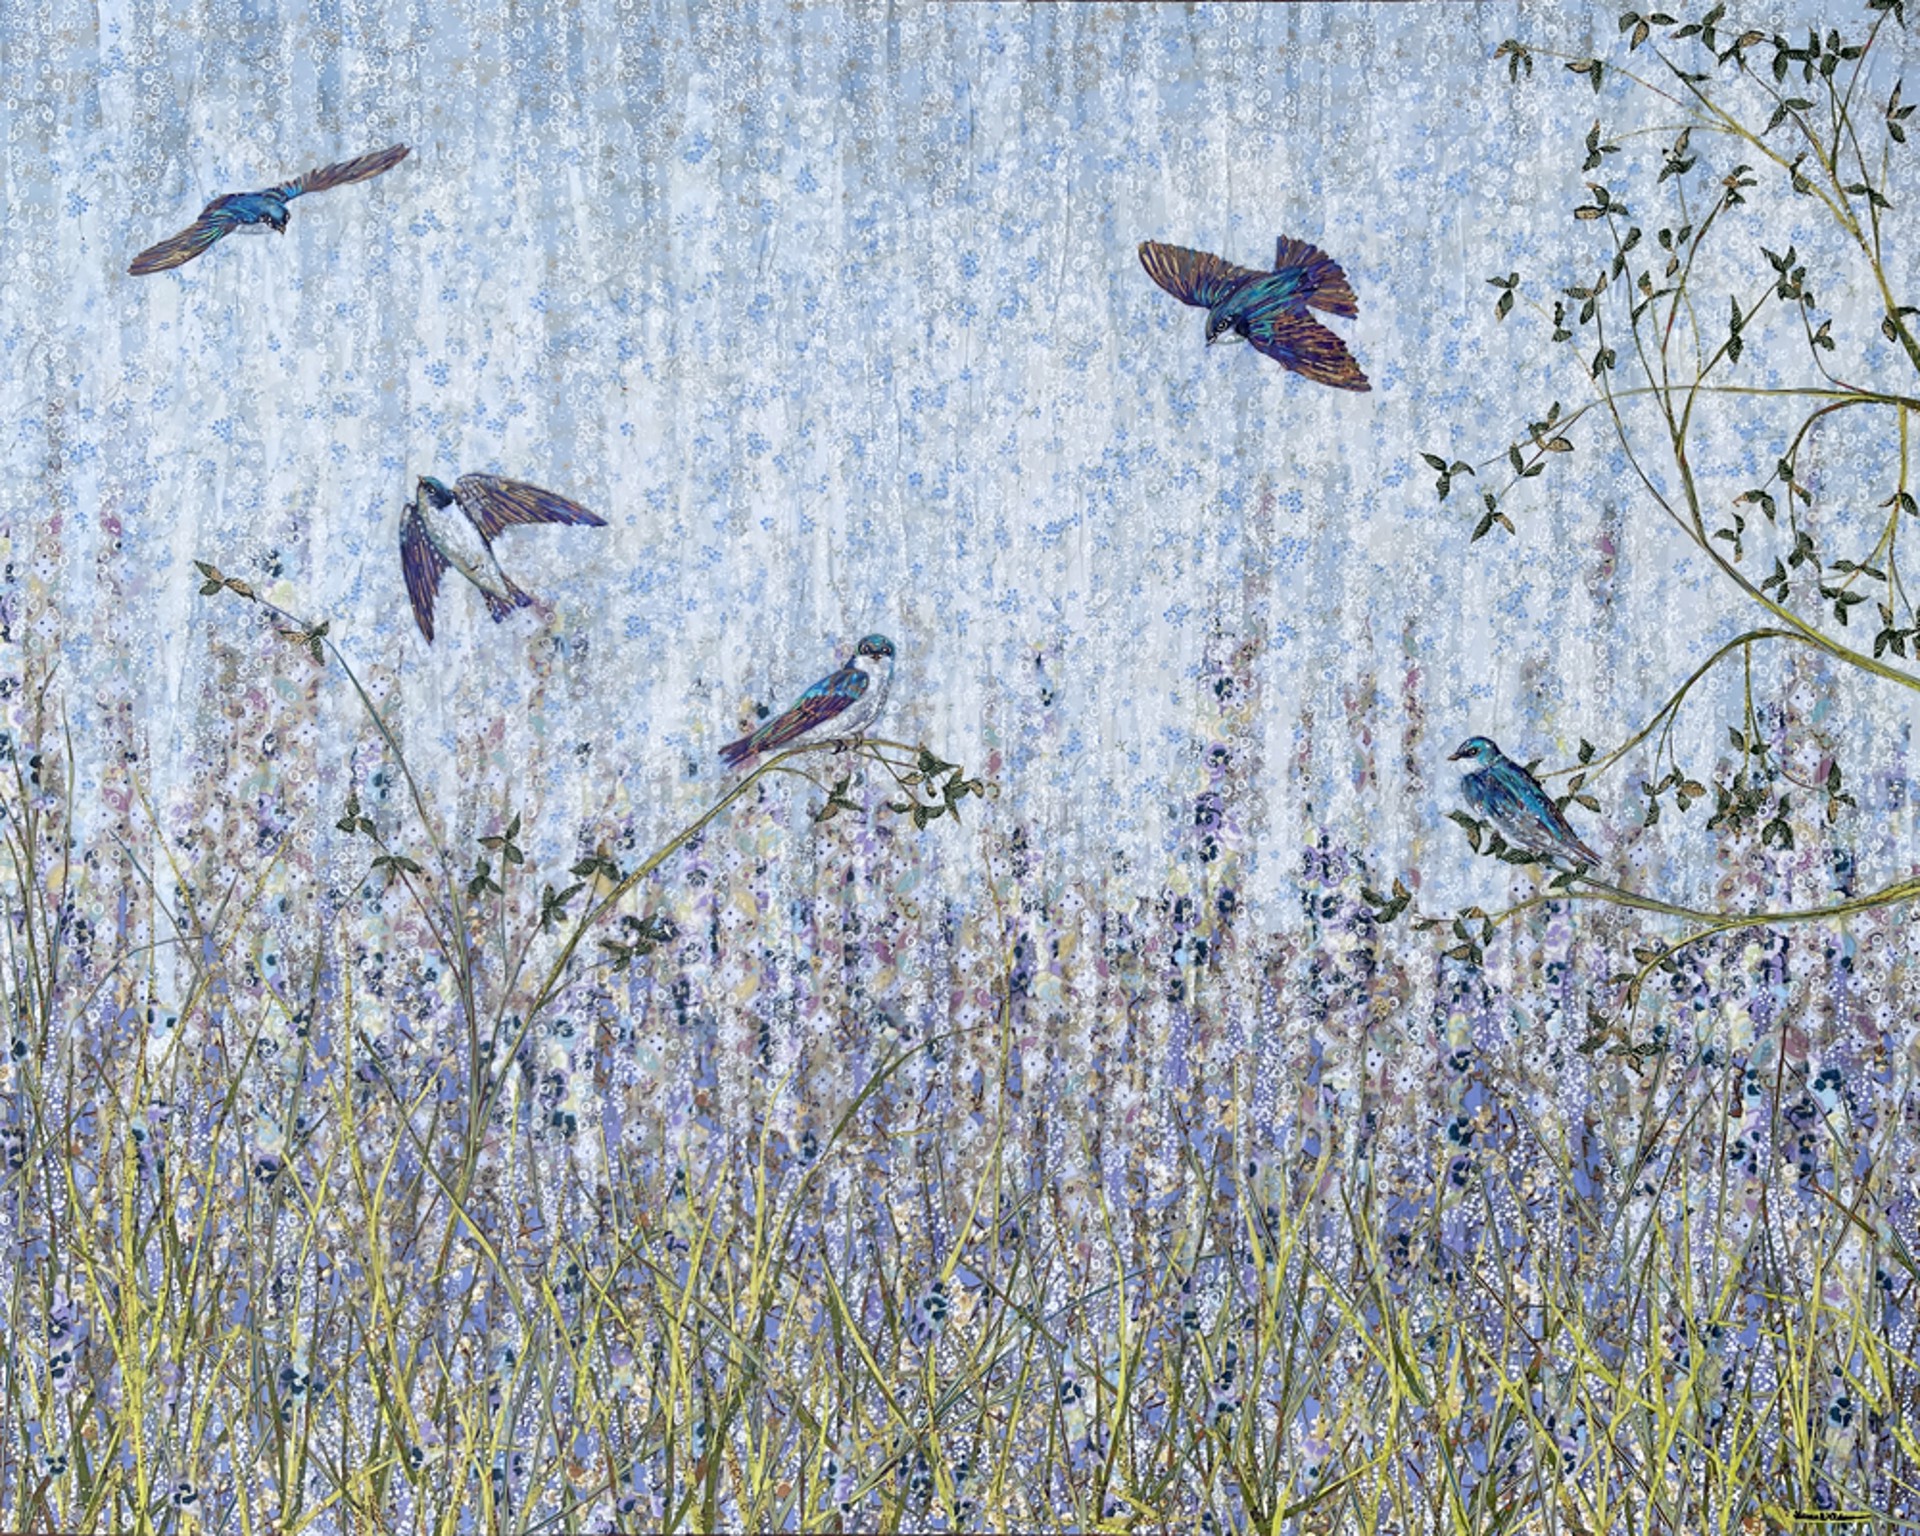 Tree Swallows in the Meadow by Laura Adams